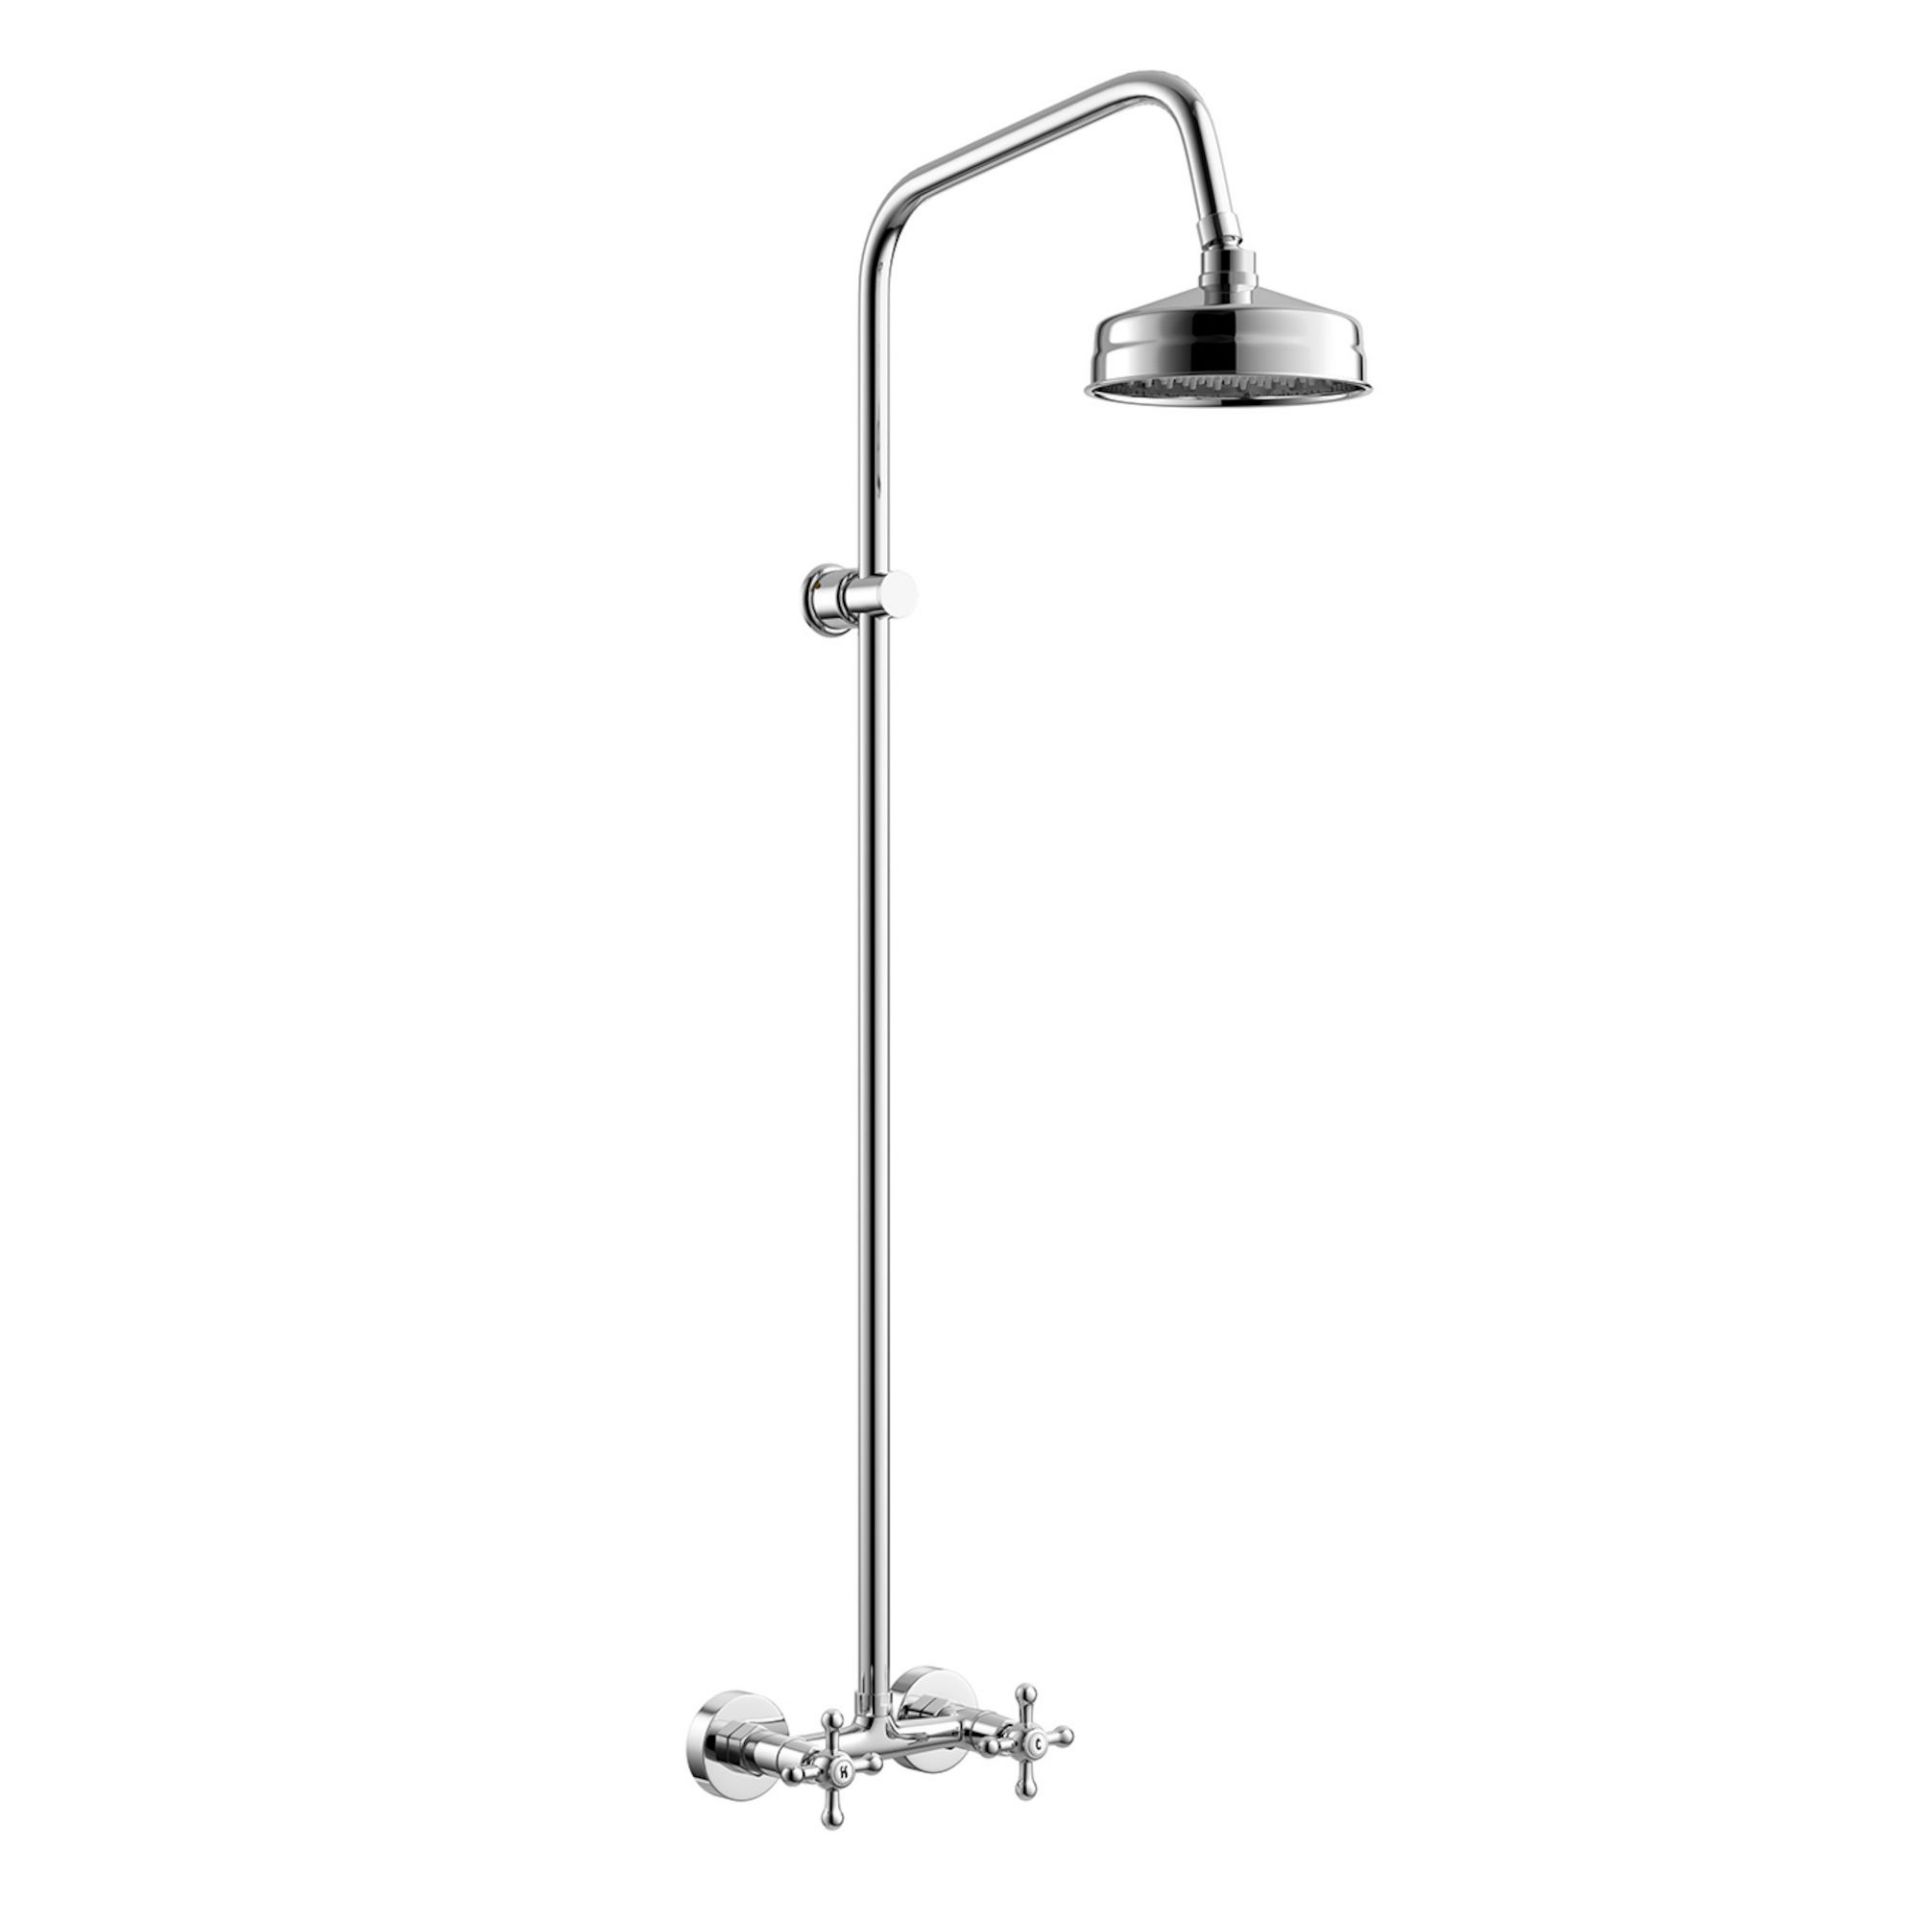 (QW26) Traditional Exposed Shower & Medium Head. Exposed design makes for a statement piece - Image 5 of 12